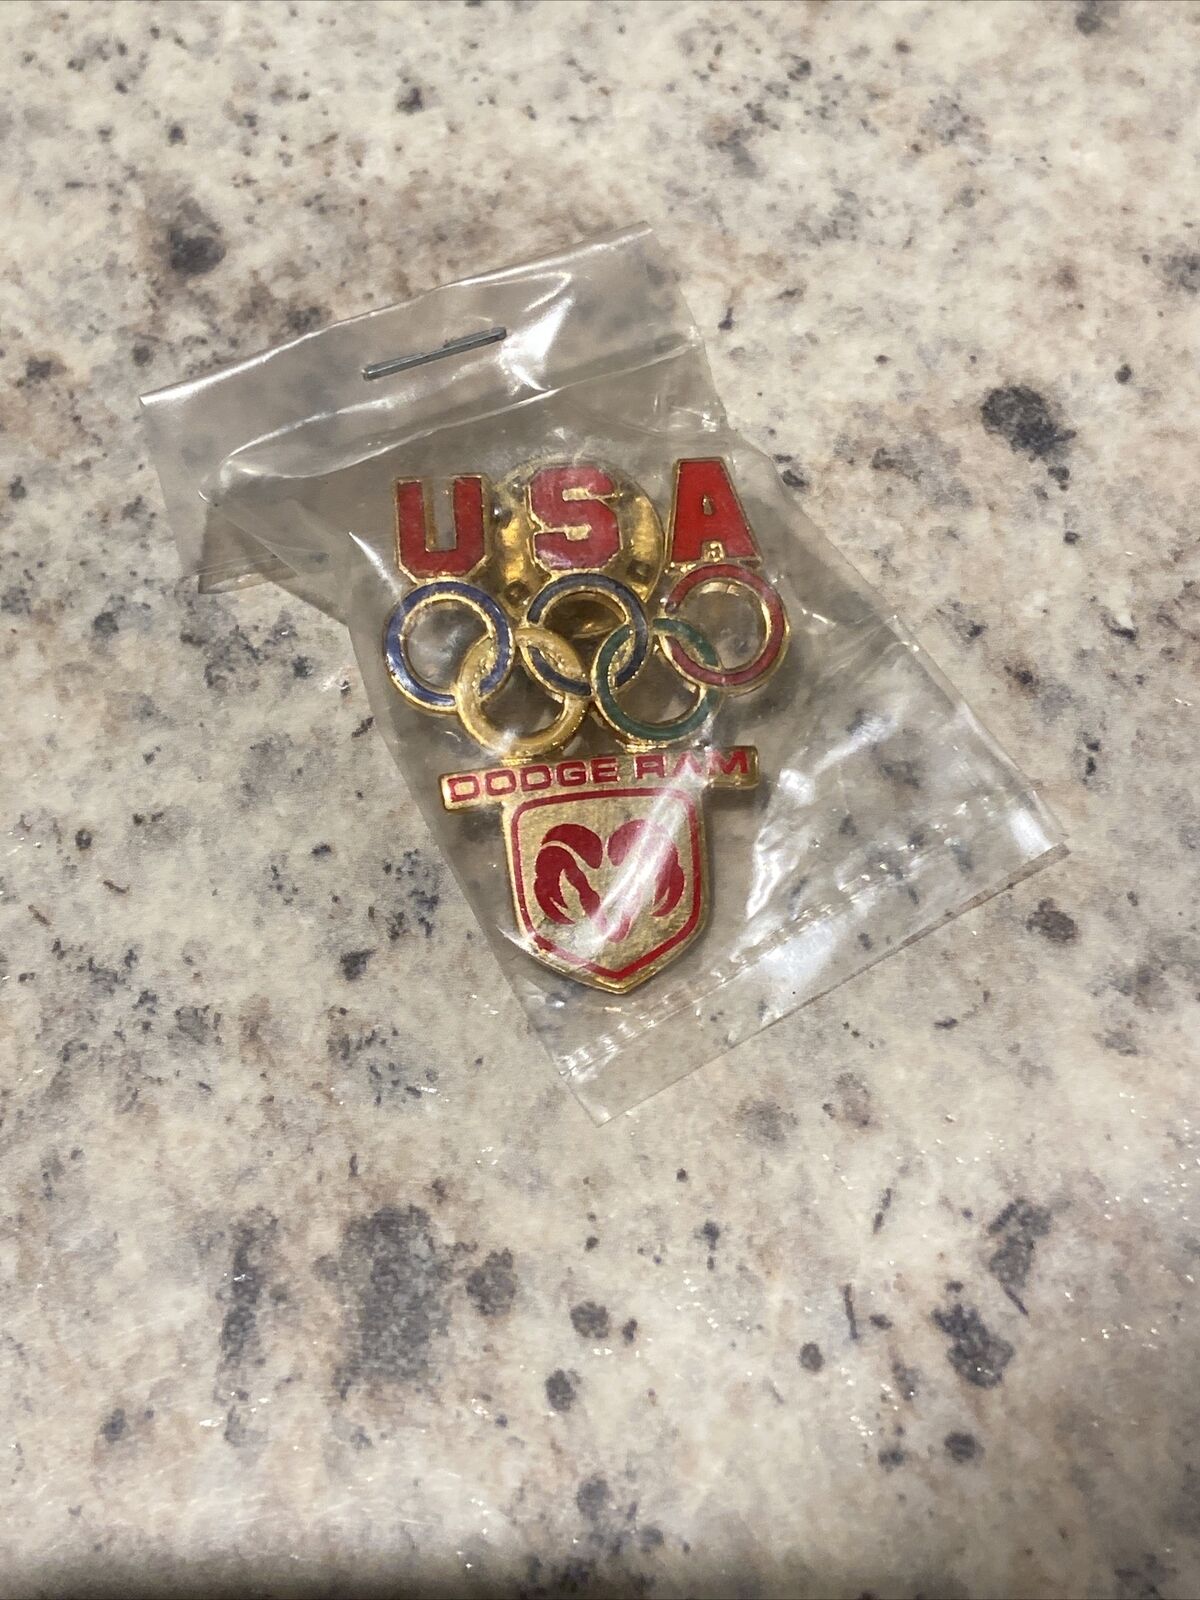 1994 Dodge Ram USA Olympic Pin Vintage Old New